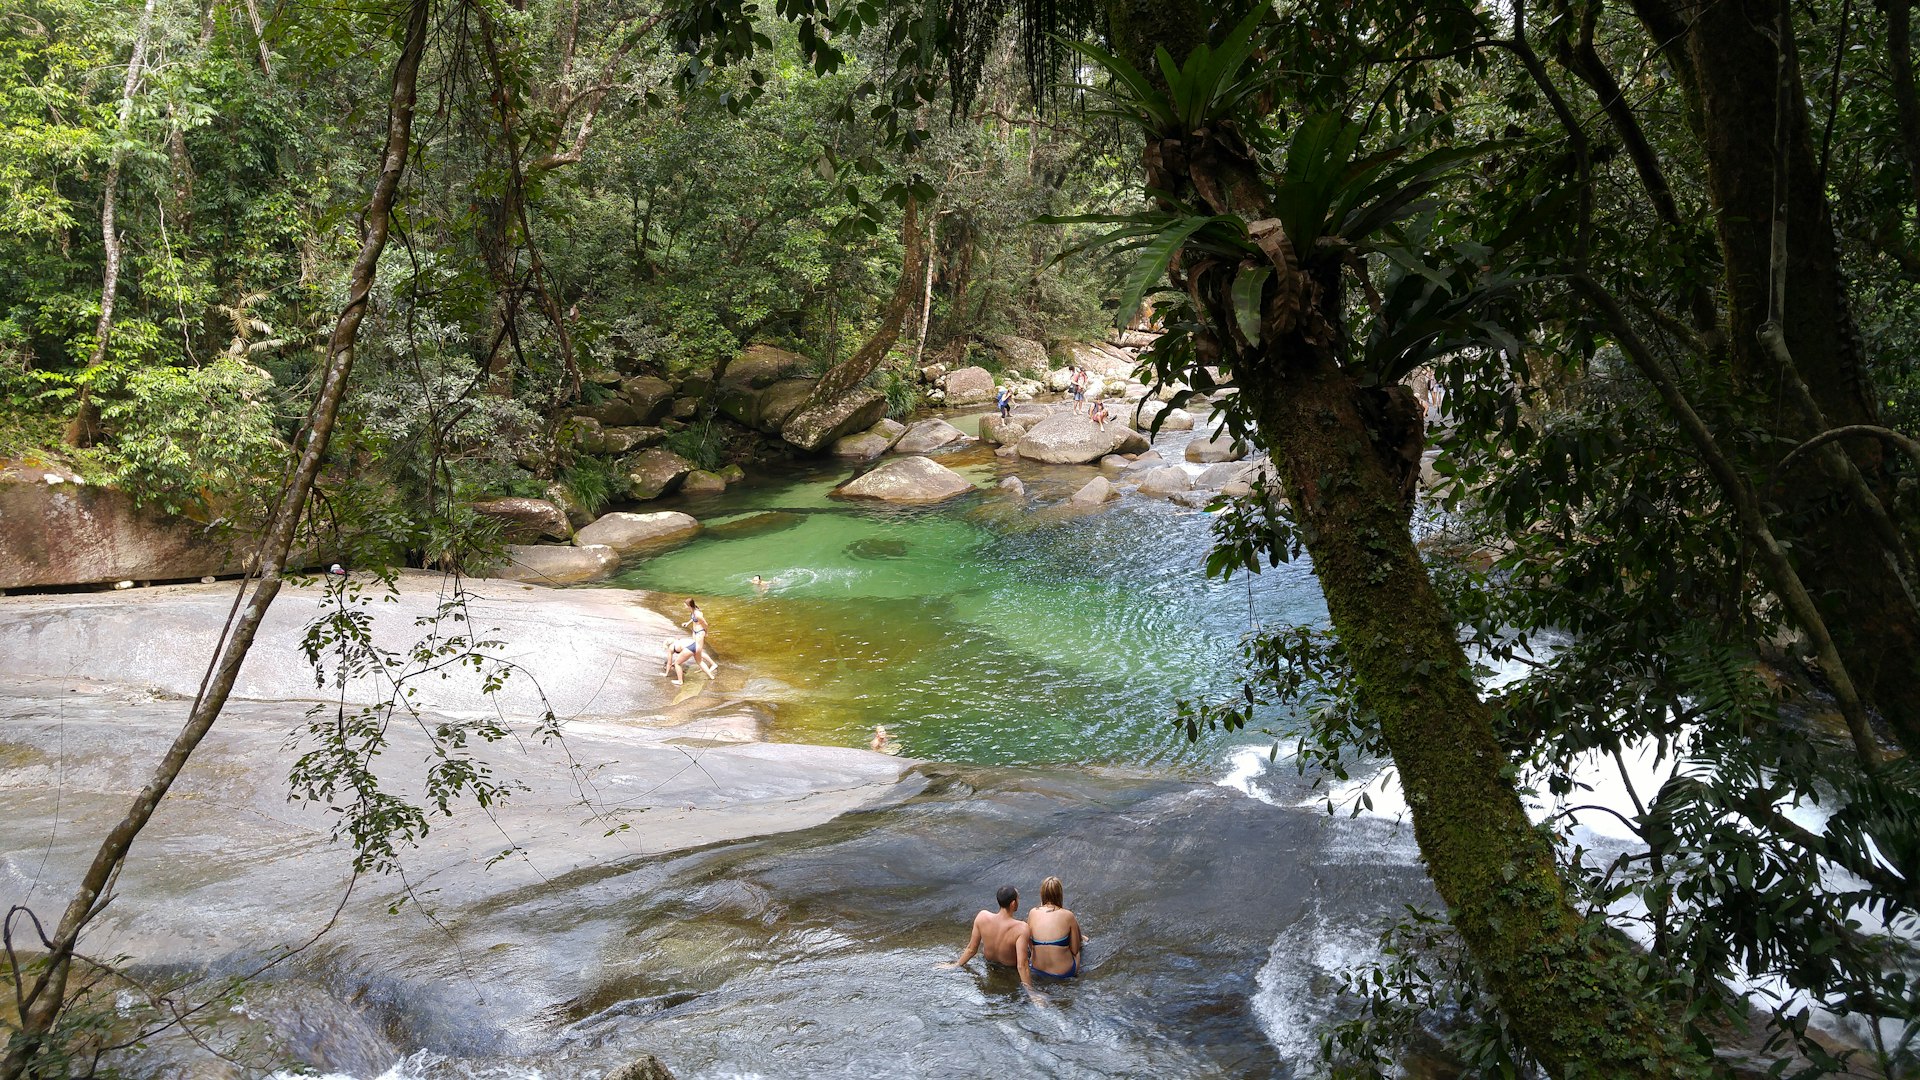 People bathing at Josephine Falls, a tiered cascade waterfall on Josephine Creek located in the Far North region of Queensland. 